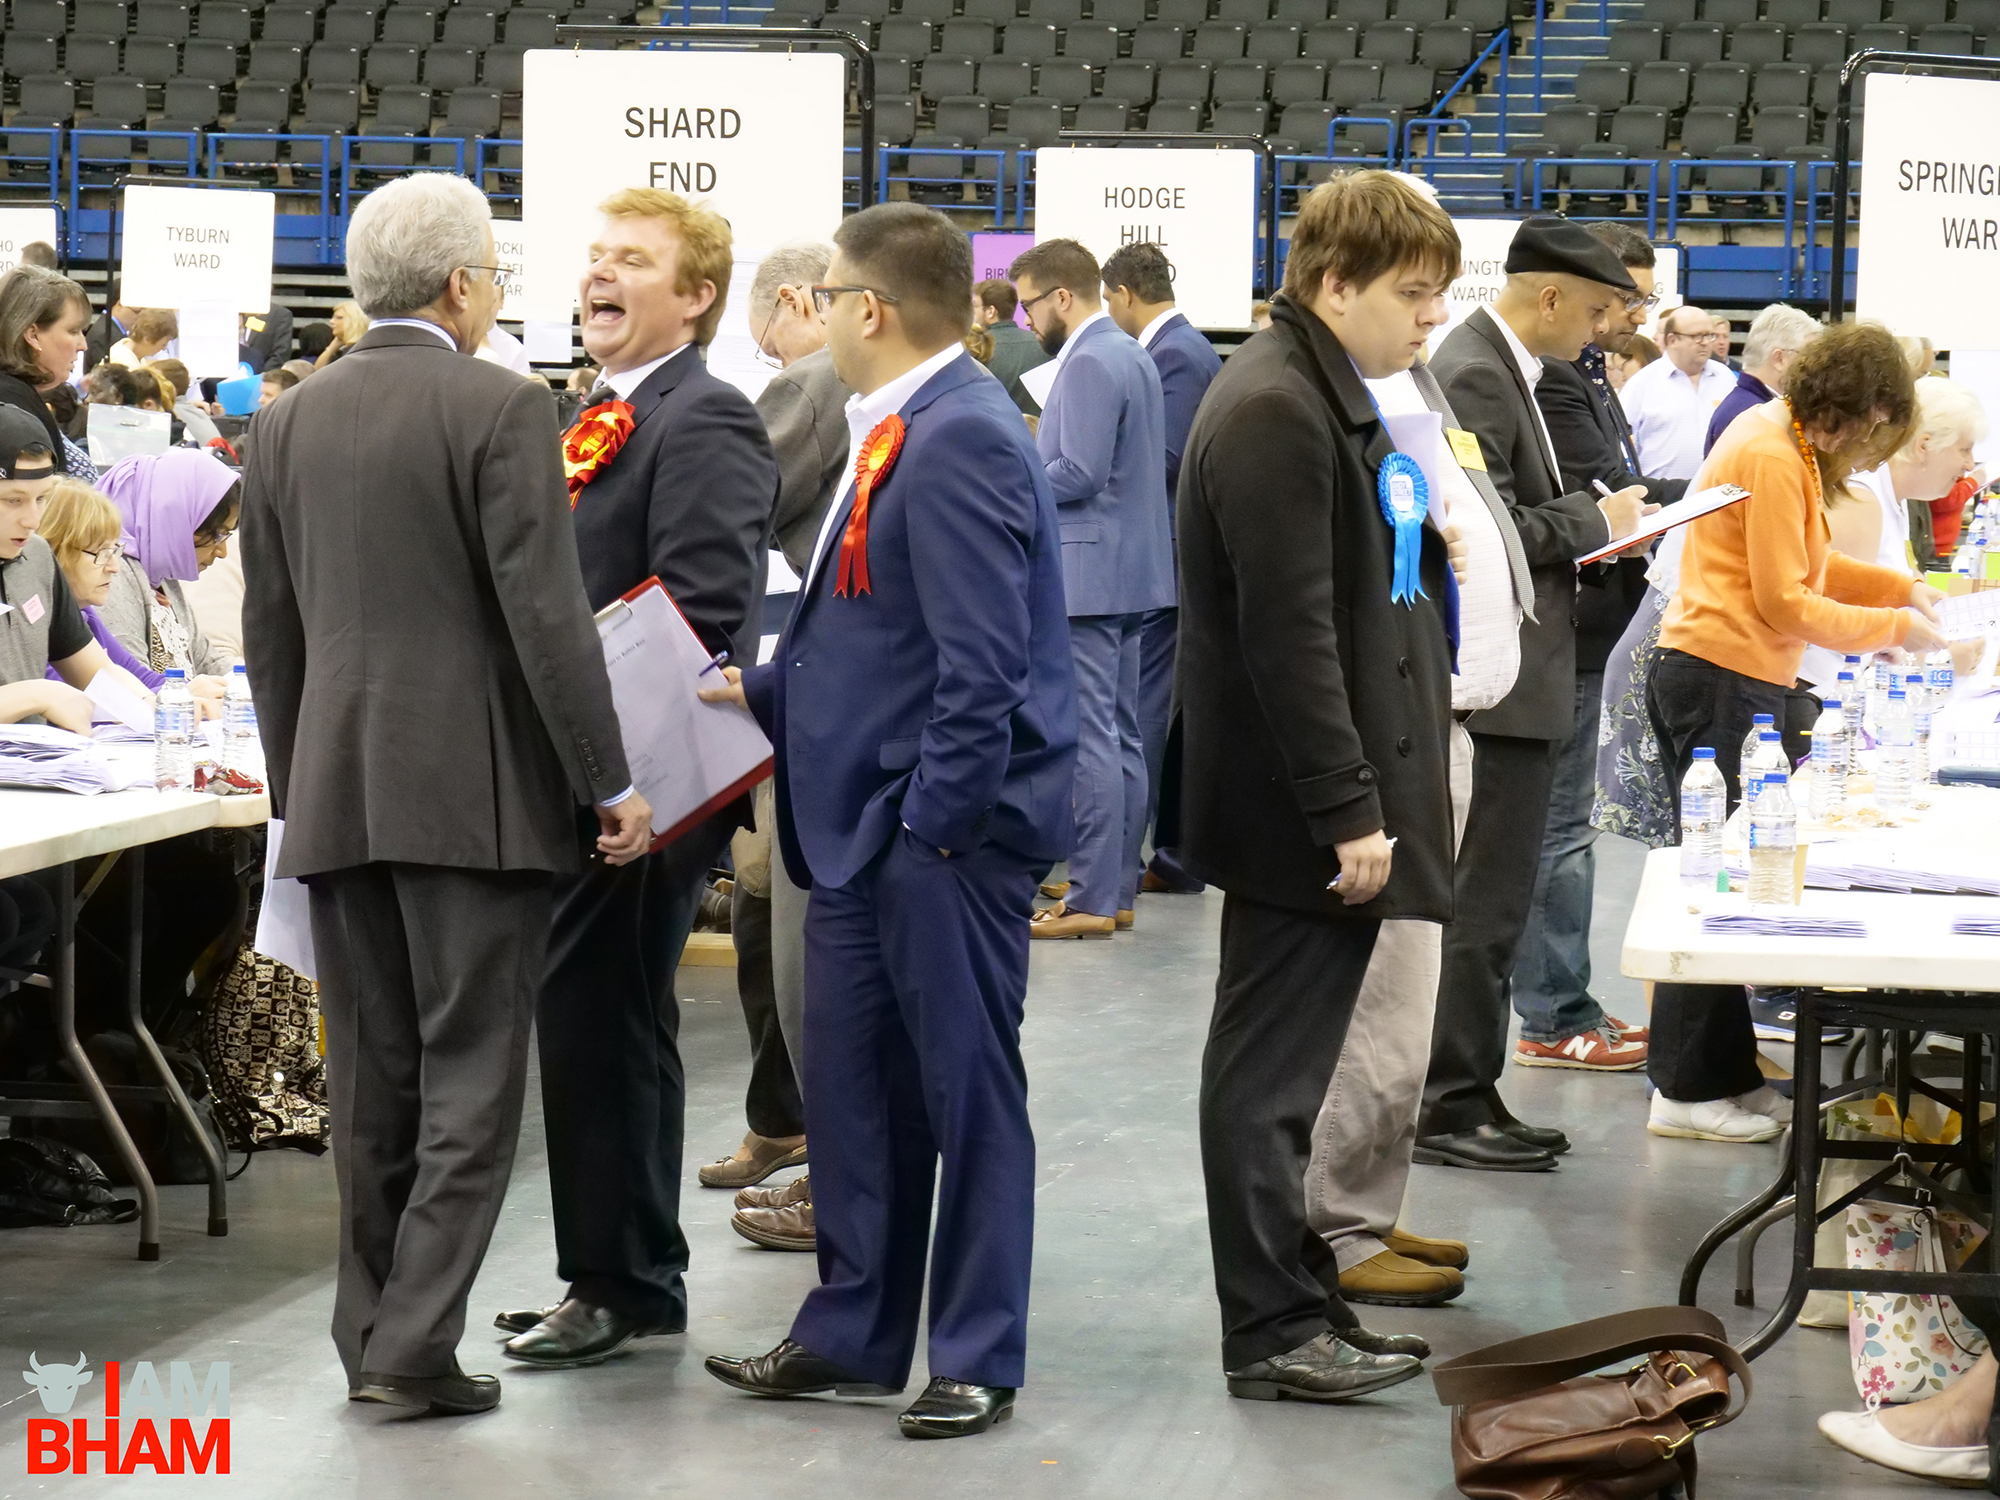 Labour councillors chat during the West Midlands Mayoral Election vote count at the Birmingham Barclaycard Arena